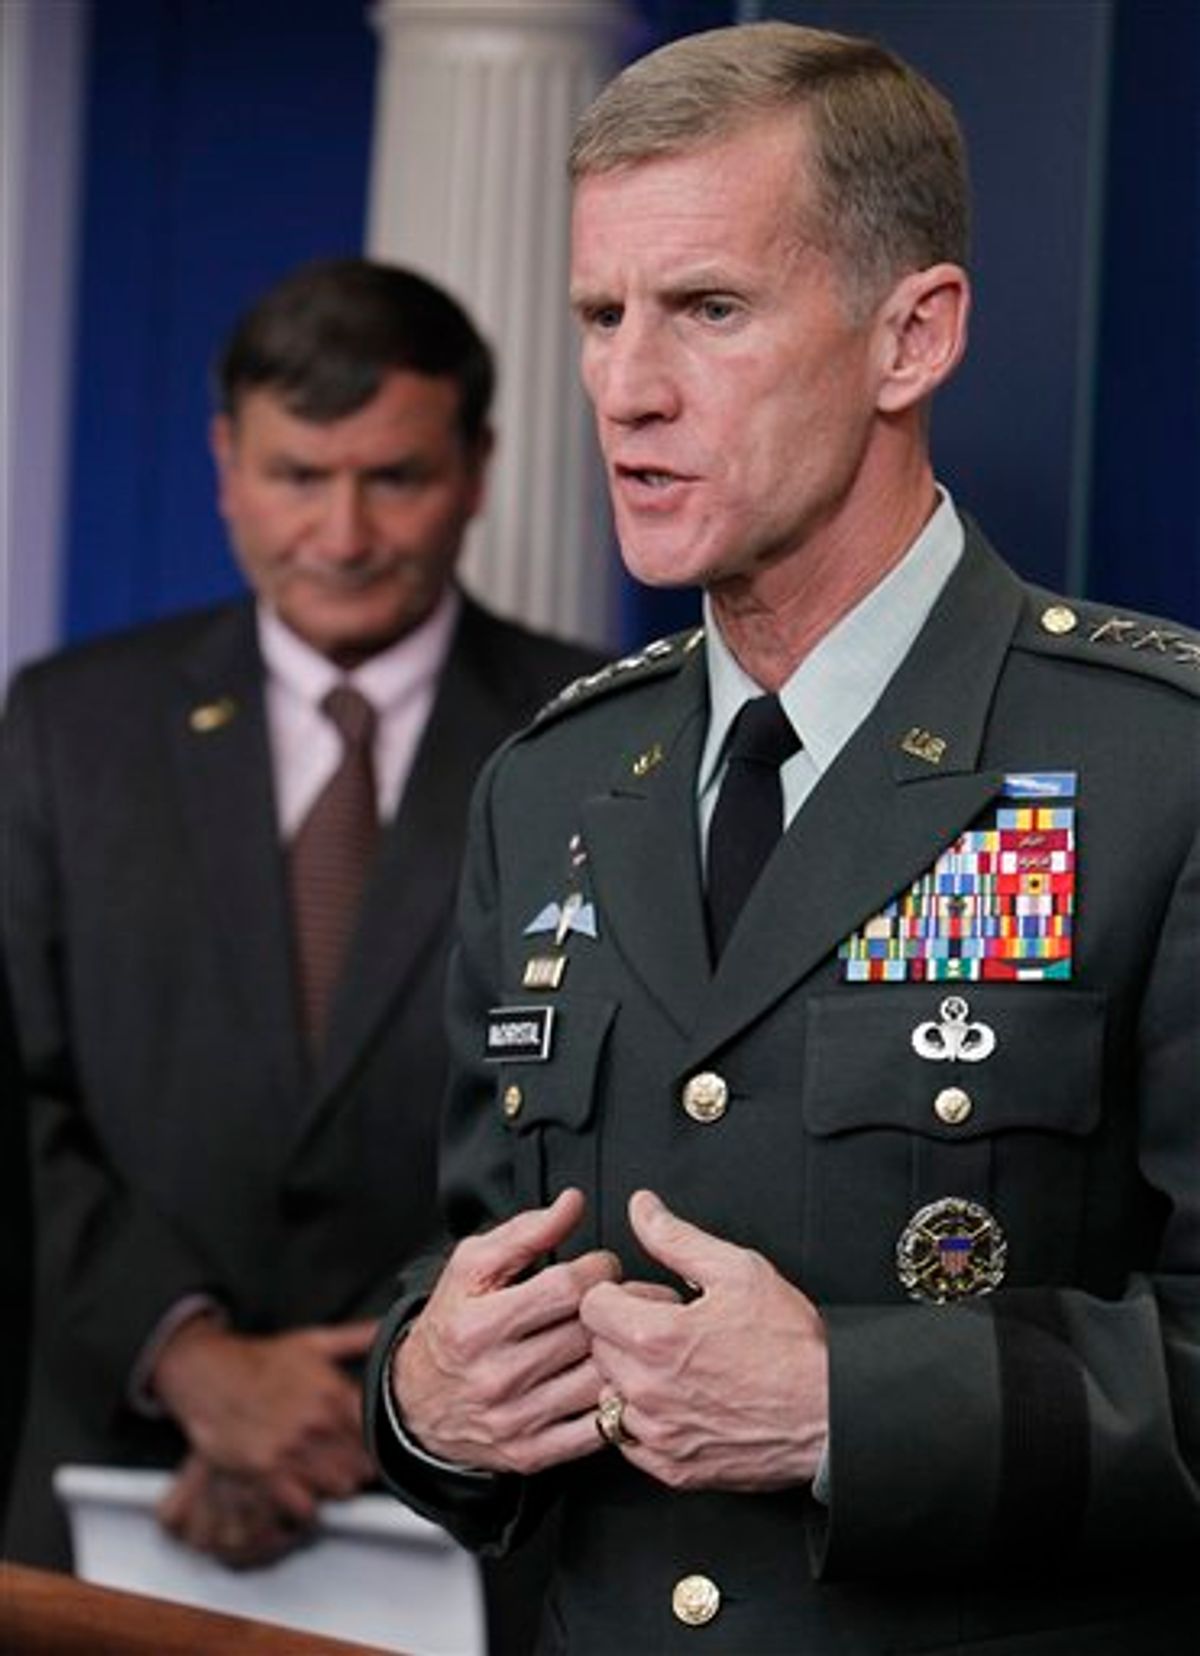 ** FILE ** In this May 10, 2010 file photo, Commander of U.S. and NATO forces in Afghanistan Gen. Stanley McChrystal, and U.S. Ambassador to Afghanistan Karl W. Eikenberry brief reporters ahead of Afghan President Hamid Karzai's visit at the White House.  An article out this week in "Rolling Stone" magazine depicts Gen. Stanley McChrystal as a lone wolf on the outs with many important figures in the Obama administration and unable to convince even some of his own soldiers that his strategy can win the war.   (AP Photo/Charles Dharapak) (AP)